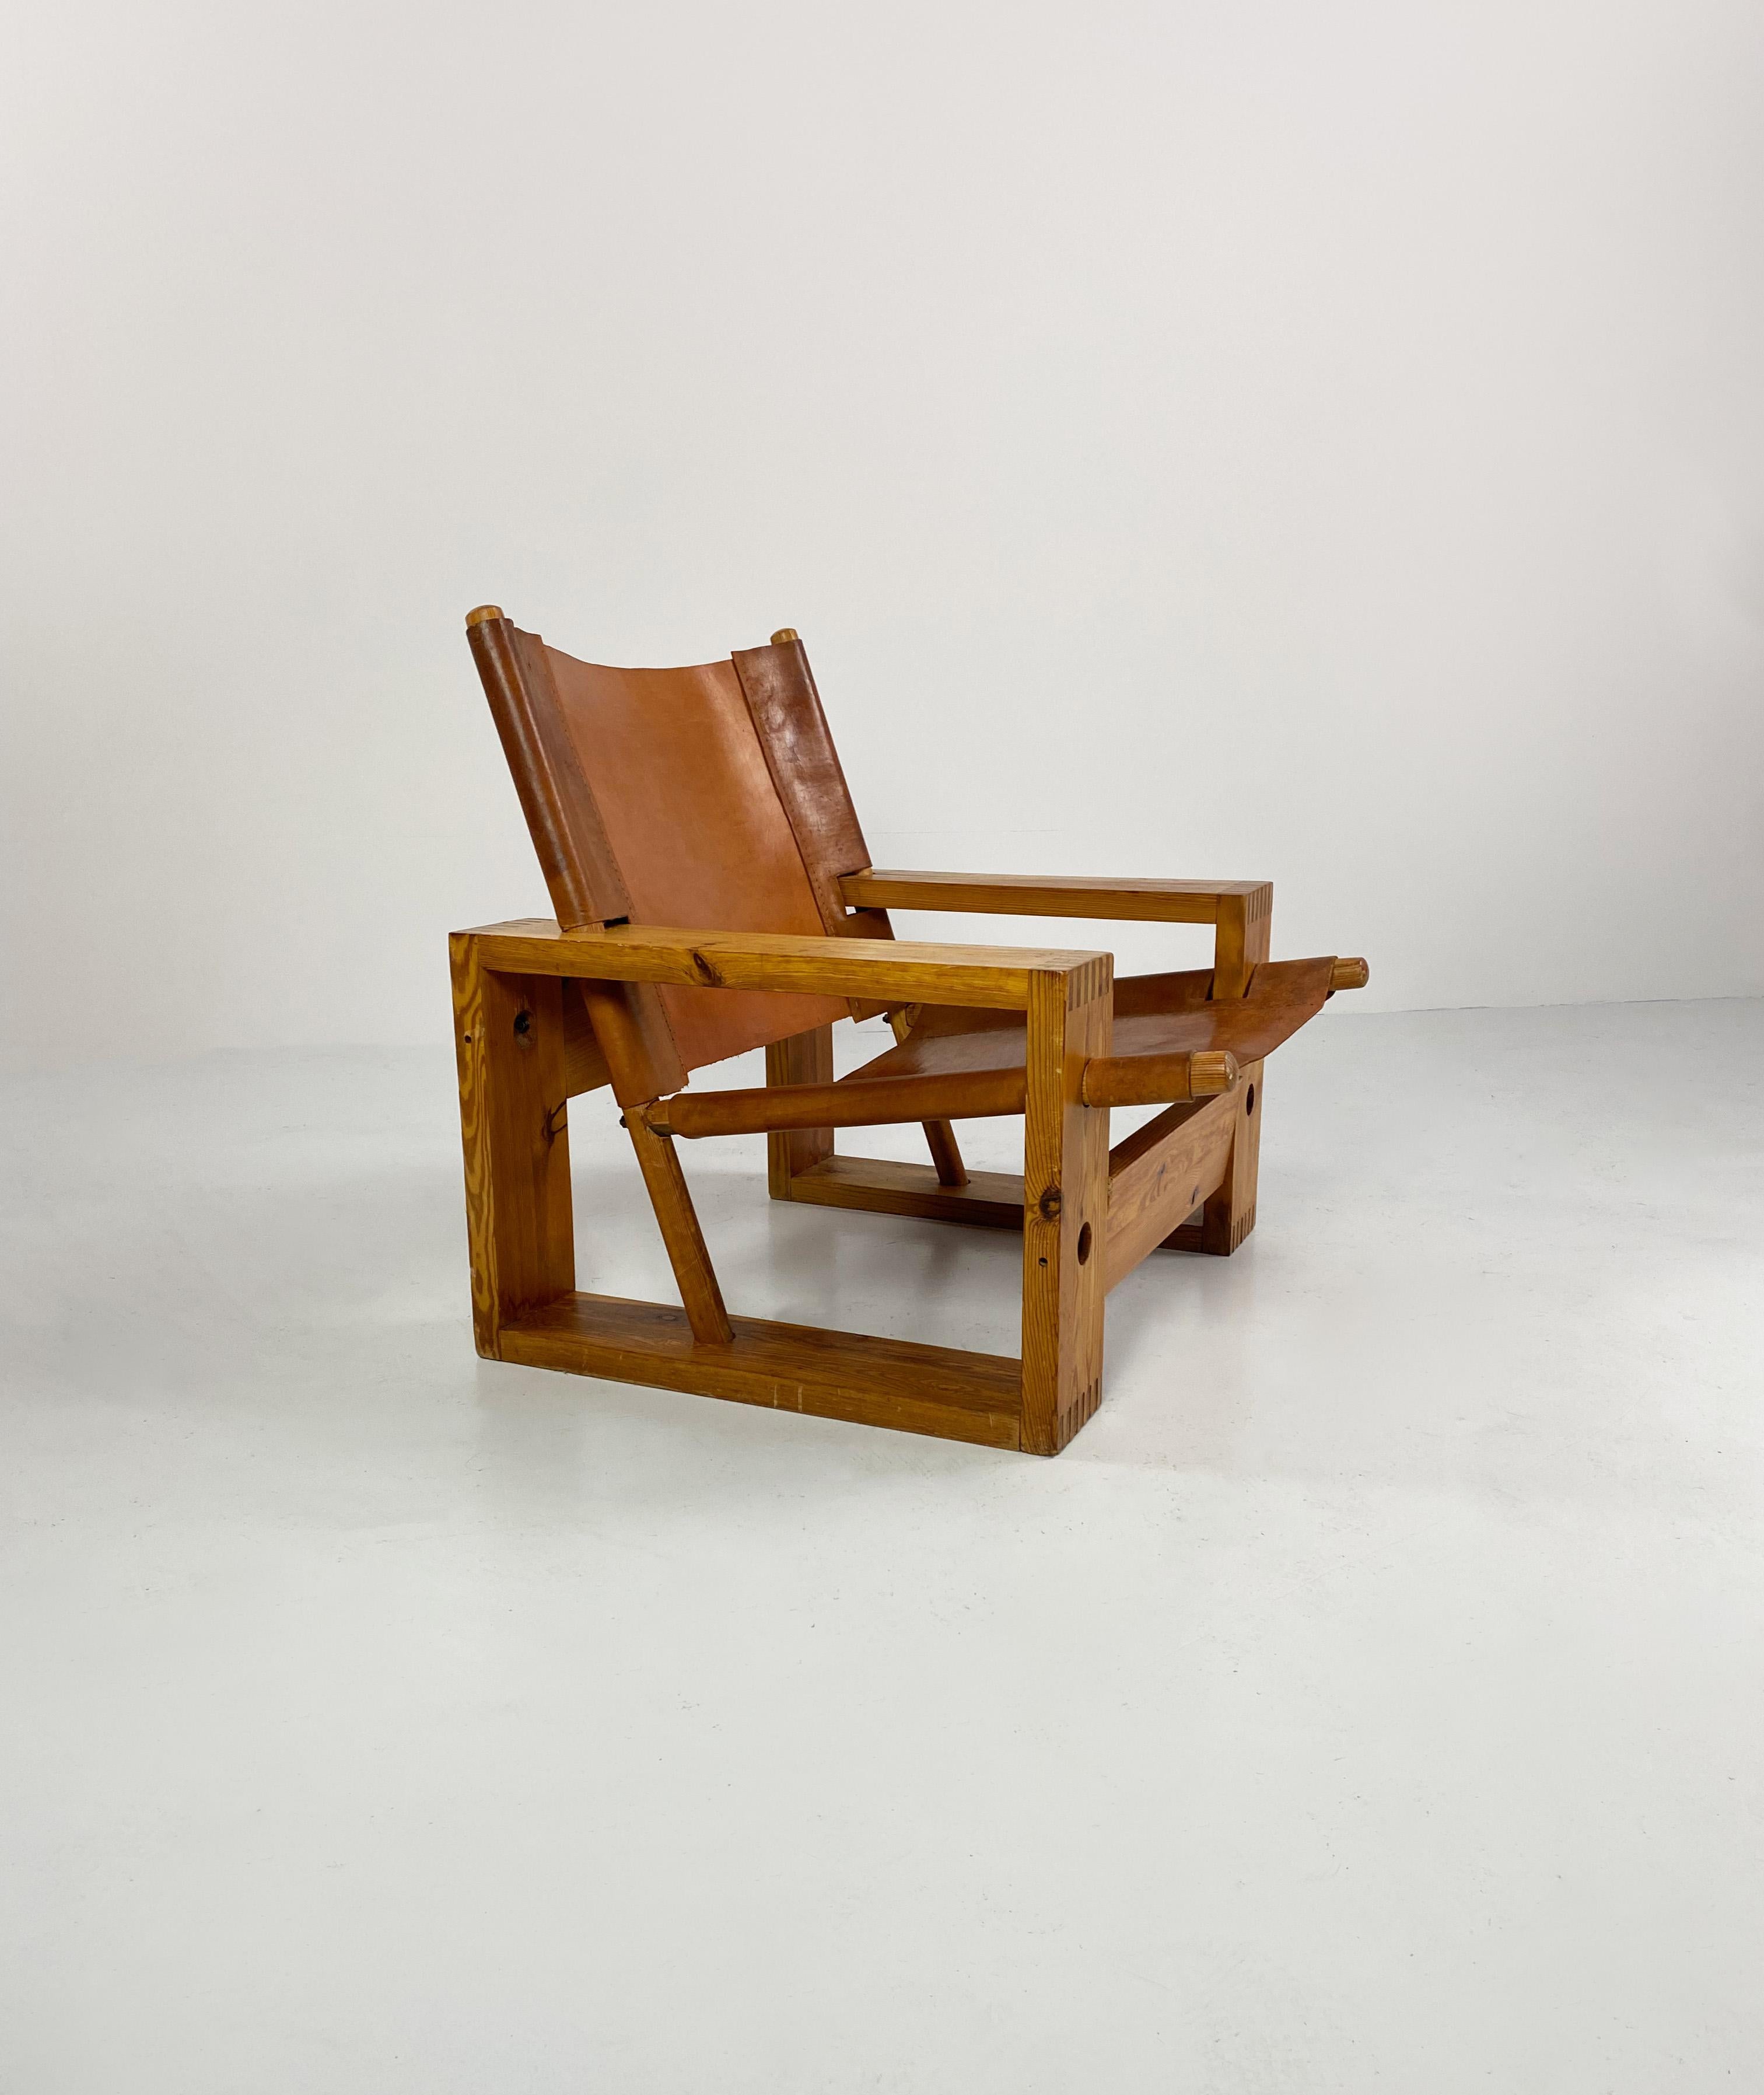 A superb lounge chair designed by Ate Van Apeldoorn and produced by Houtwerk Hattem, the Dutch furniture manufacturer he founded in 1958. 

Composed from a pine frame with thick inset dowels that support a cognac leather seat and back rest. The